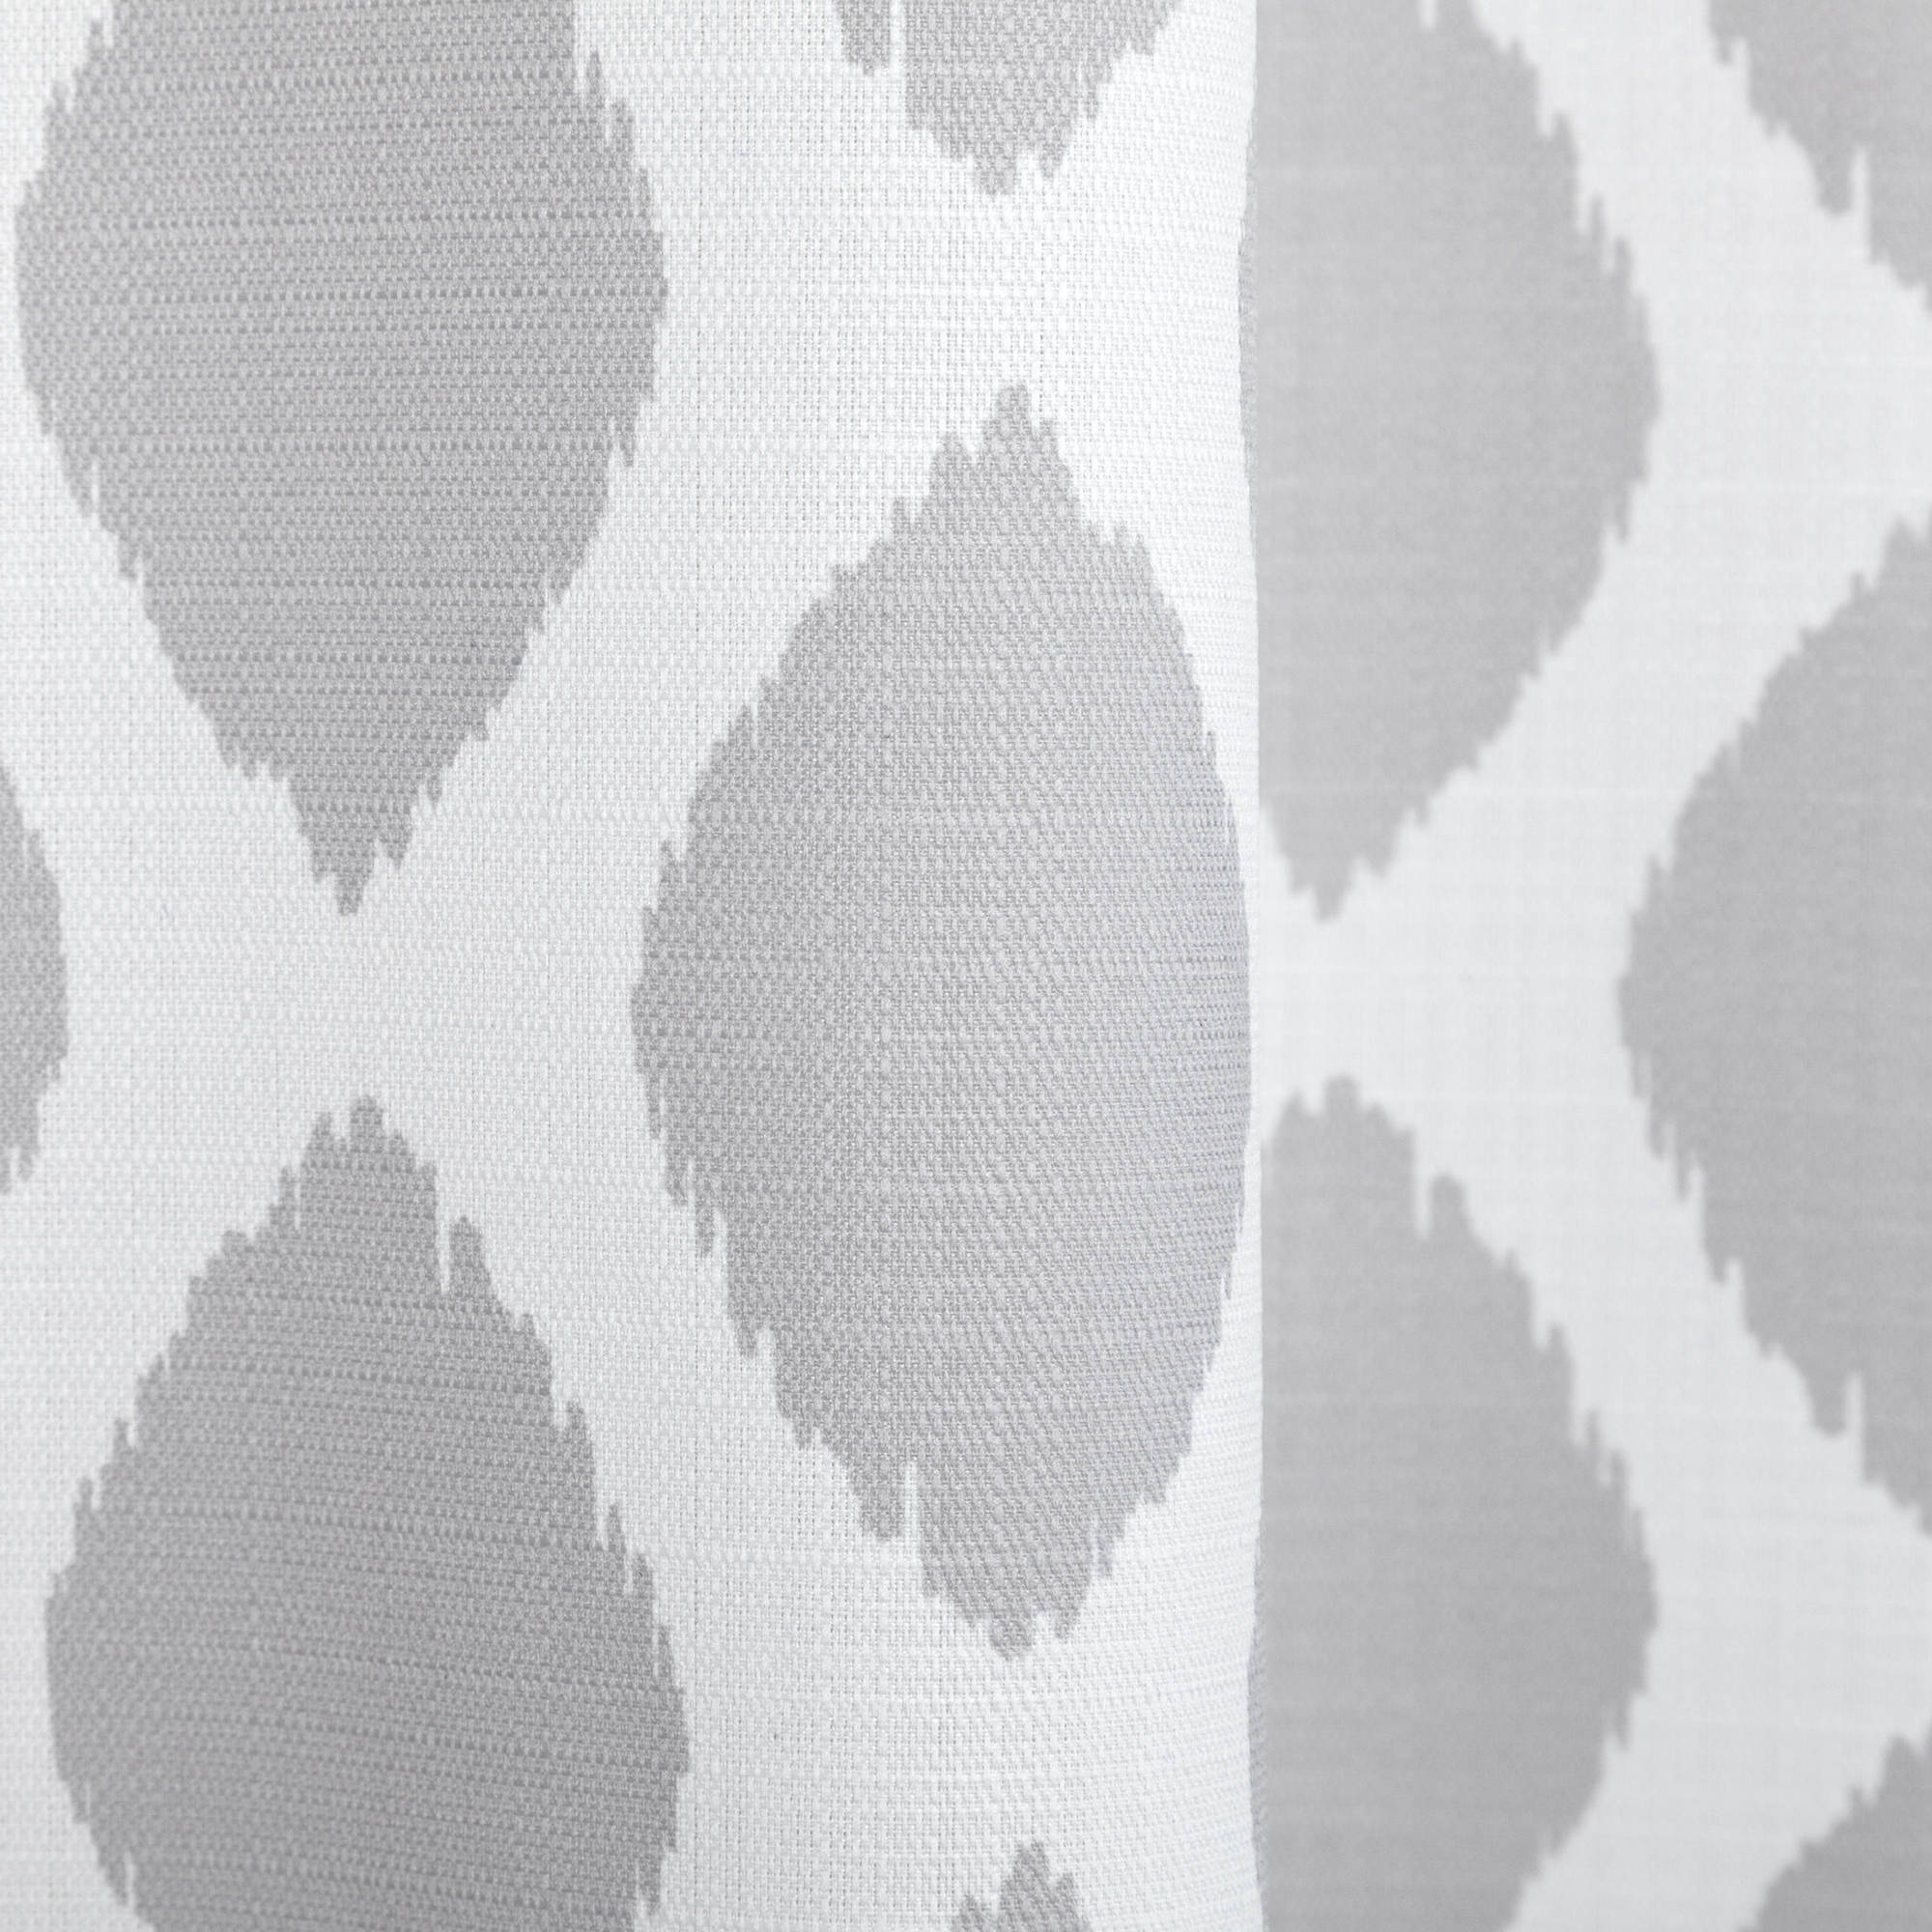 Better Homes and Gardens Ikat Diamonds Curtain Panel - image 2 of 5